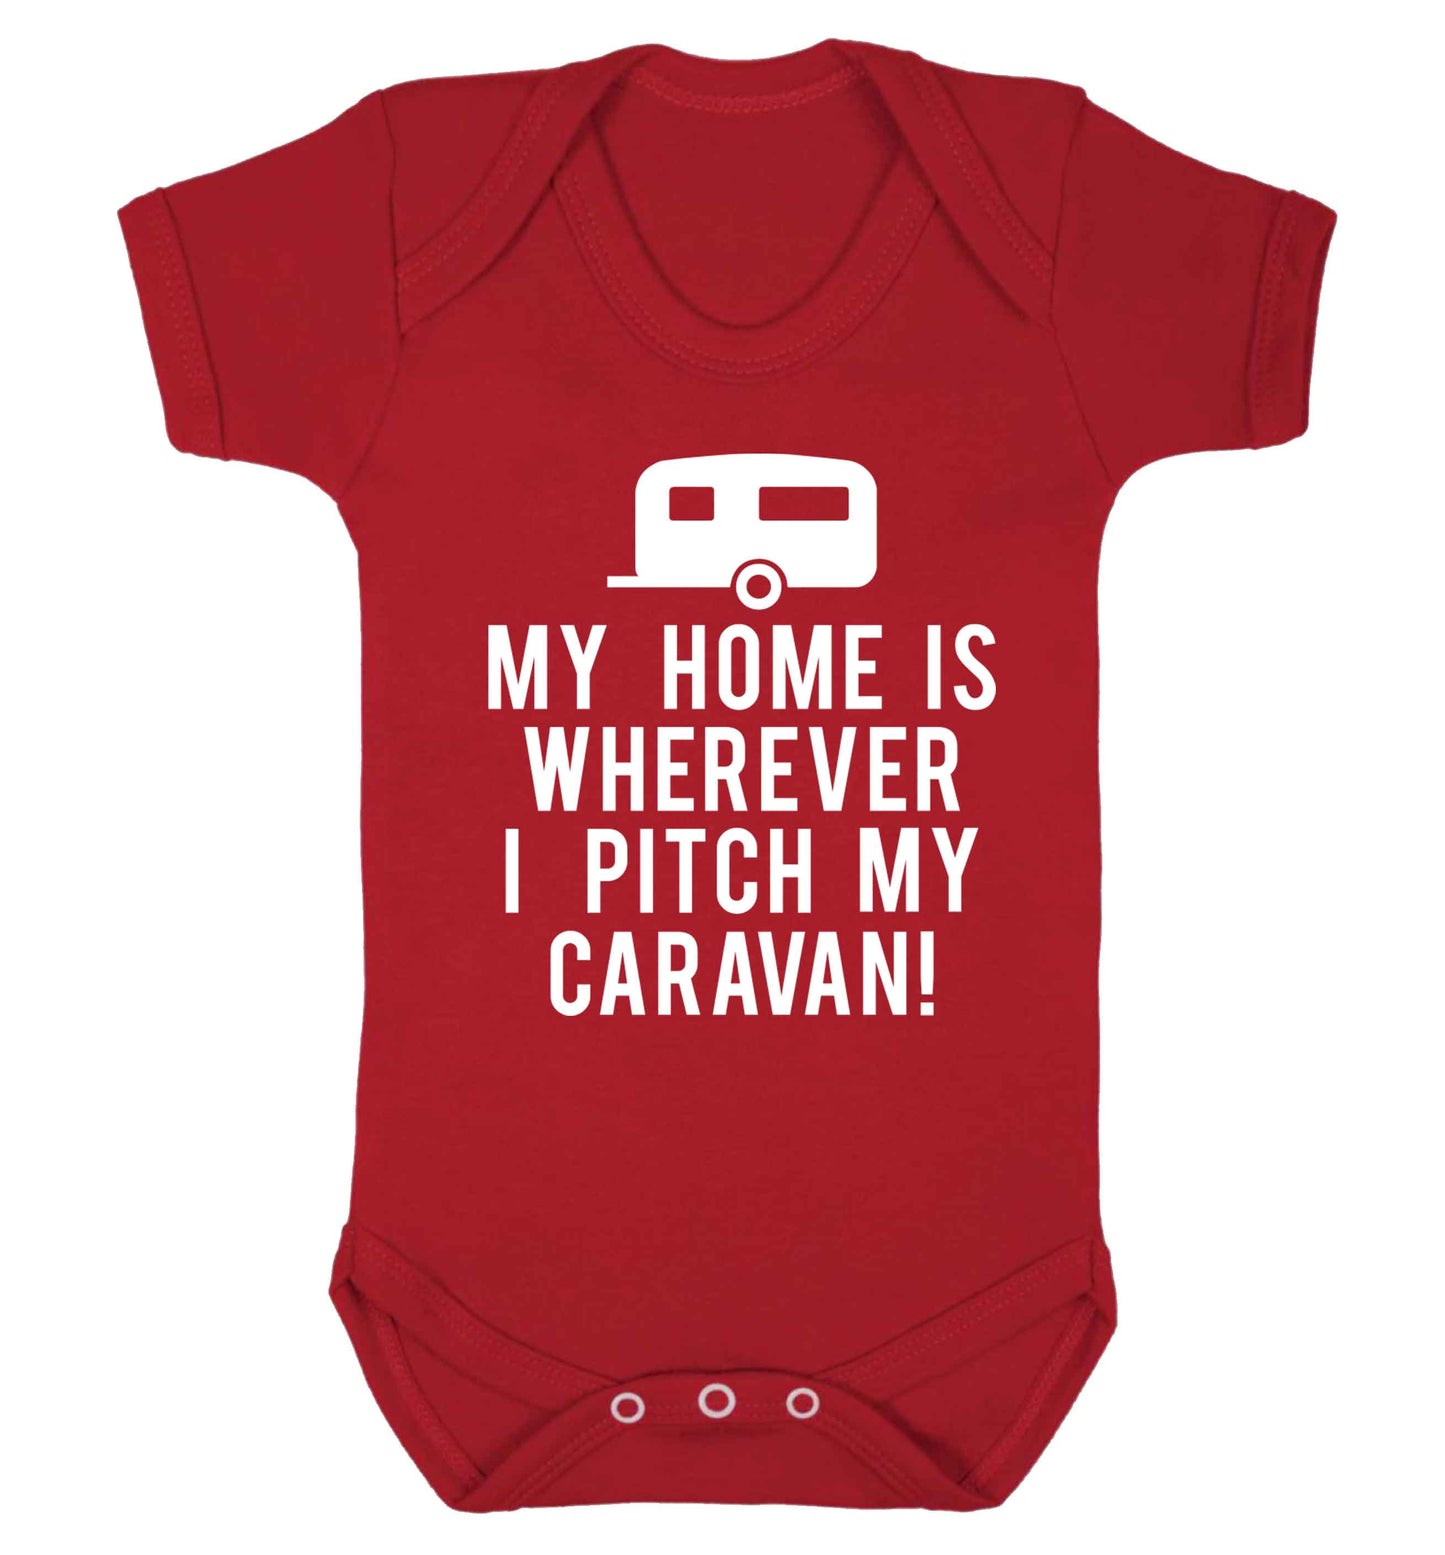 My home is wherever I pitch my caravan Baby Vest red 18-24 months